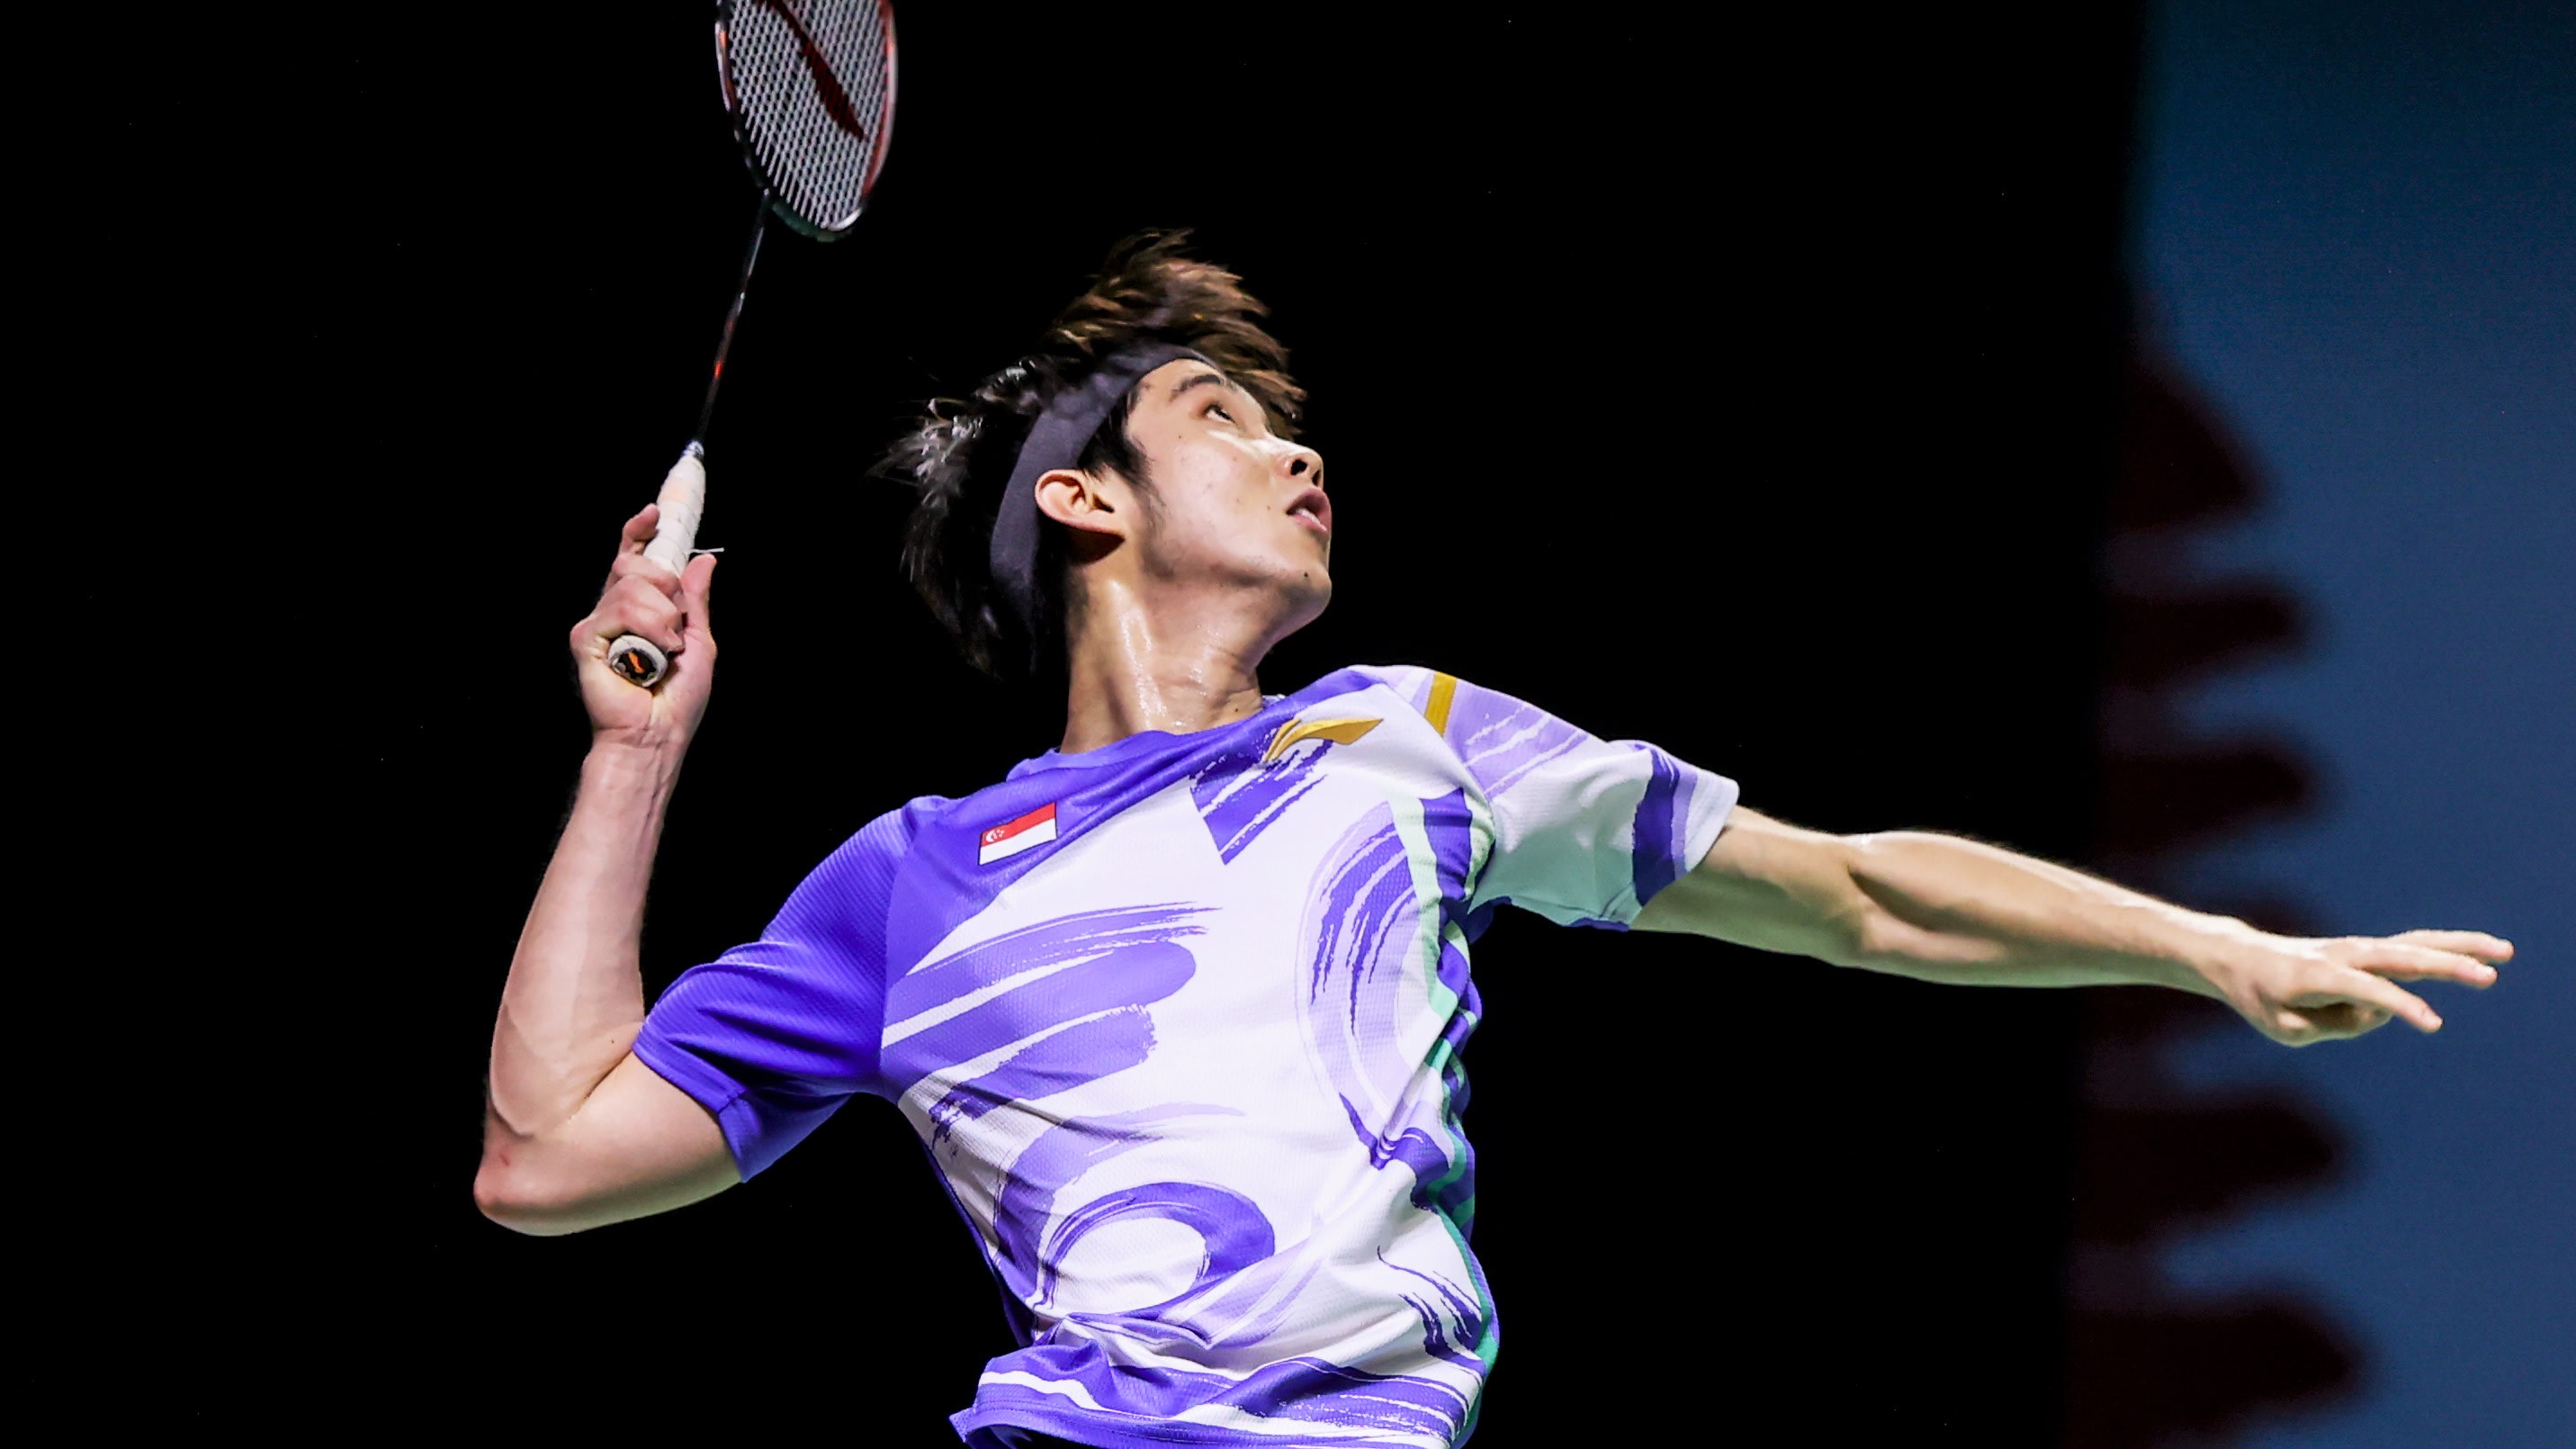 StarHub's Sports+ is the place to catch homegrown badminton ace Loh Kean Yew in action. Photo: Badminton Photo